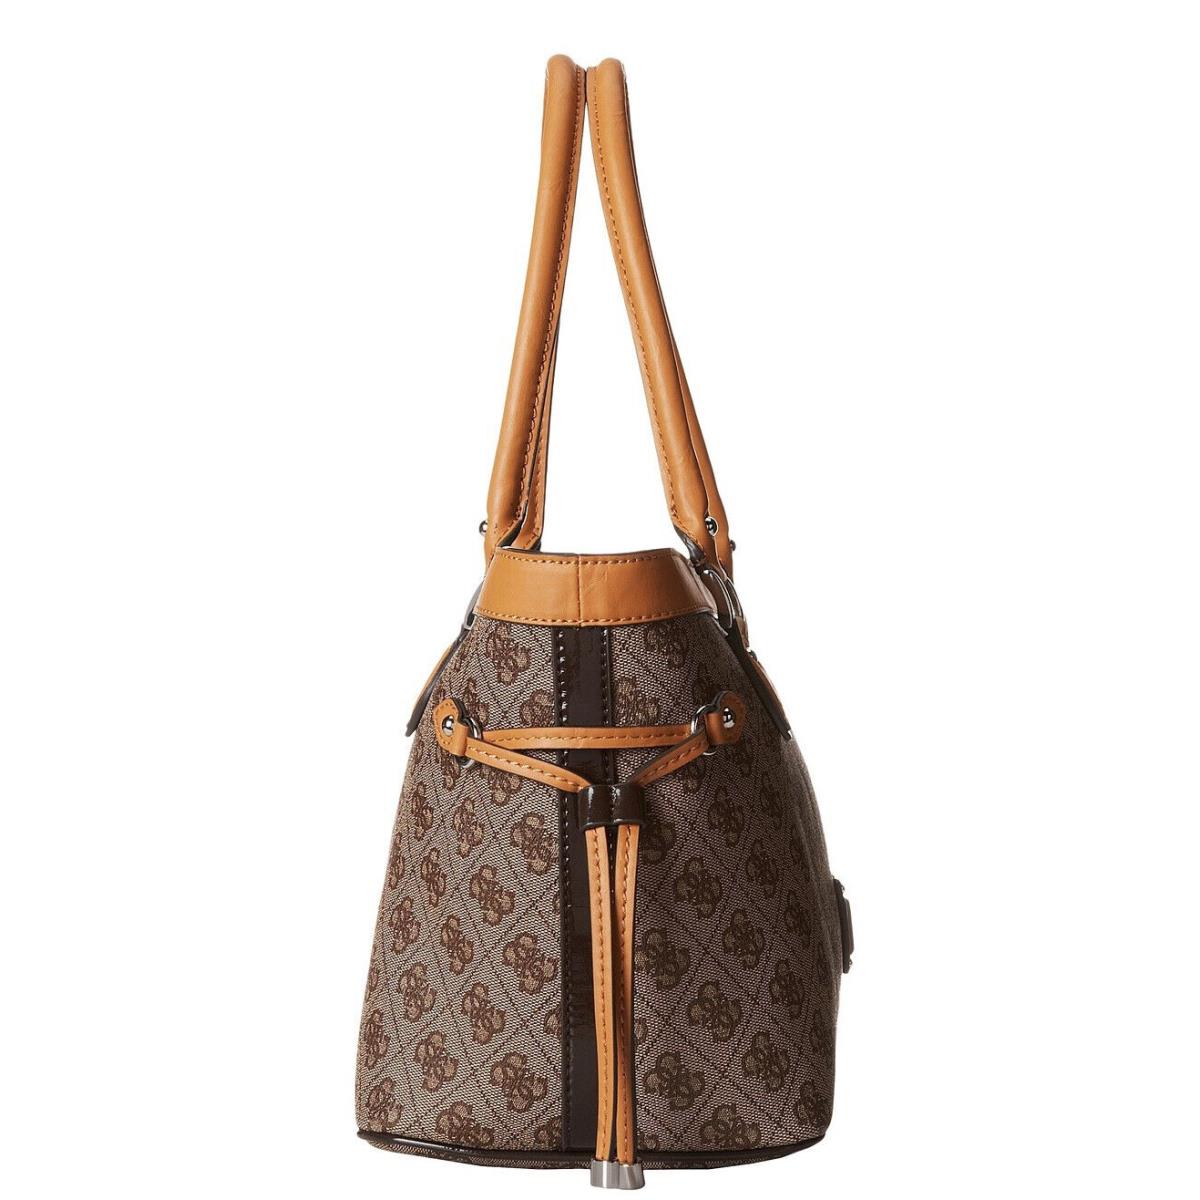 Guess  bag   - Brown Exterior, Beige Lining